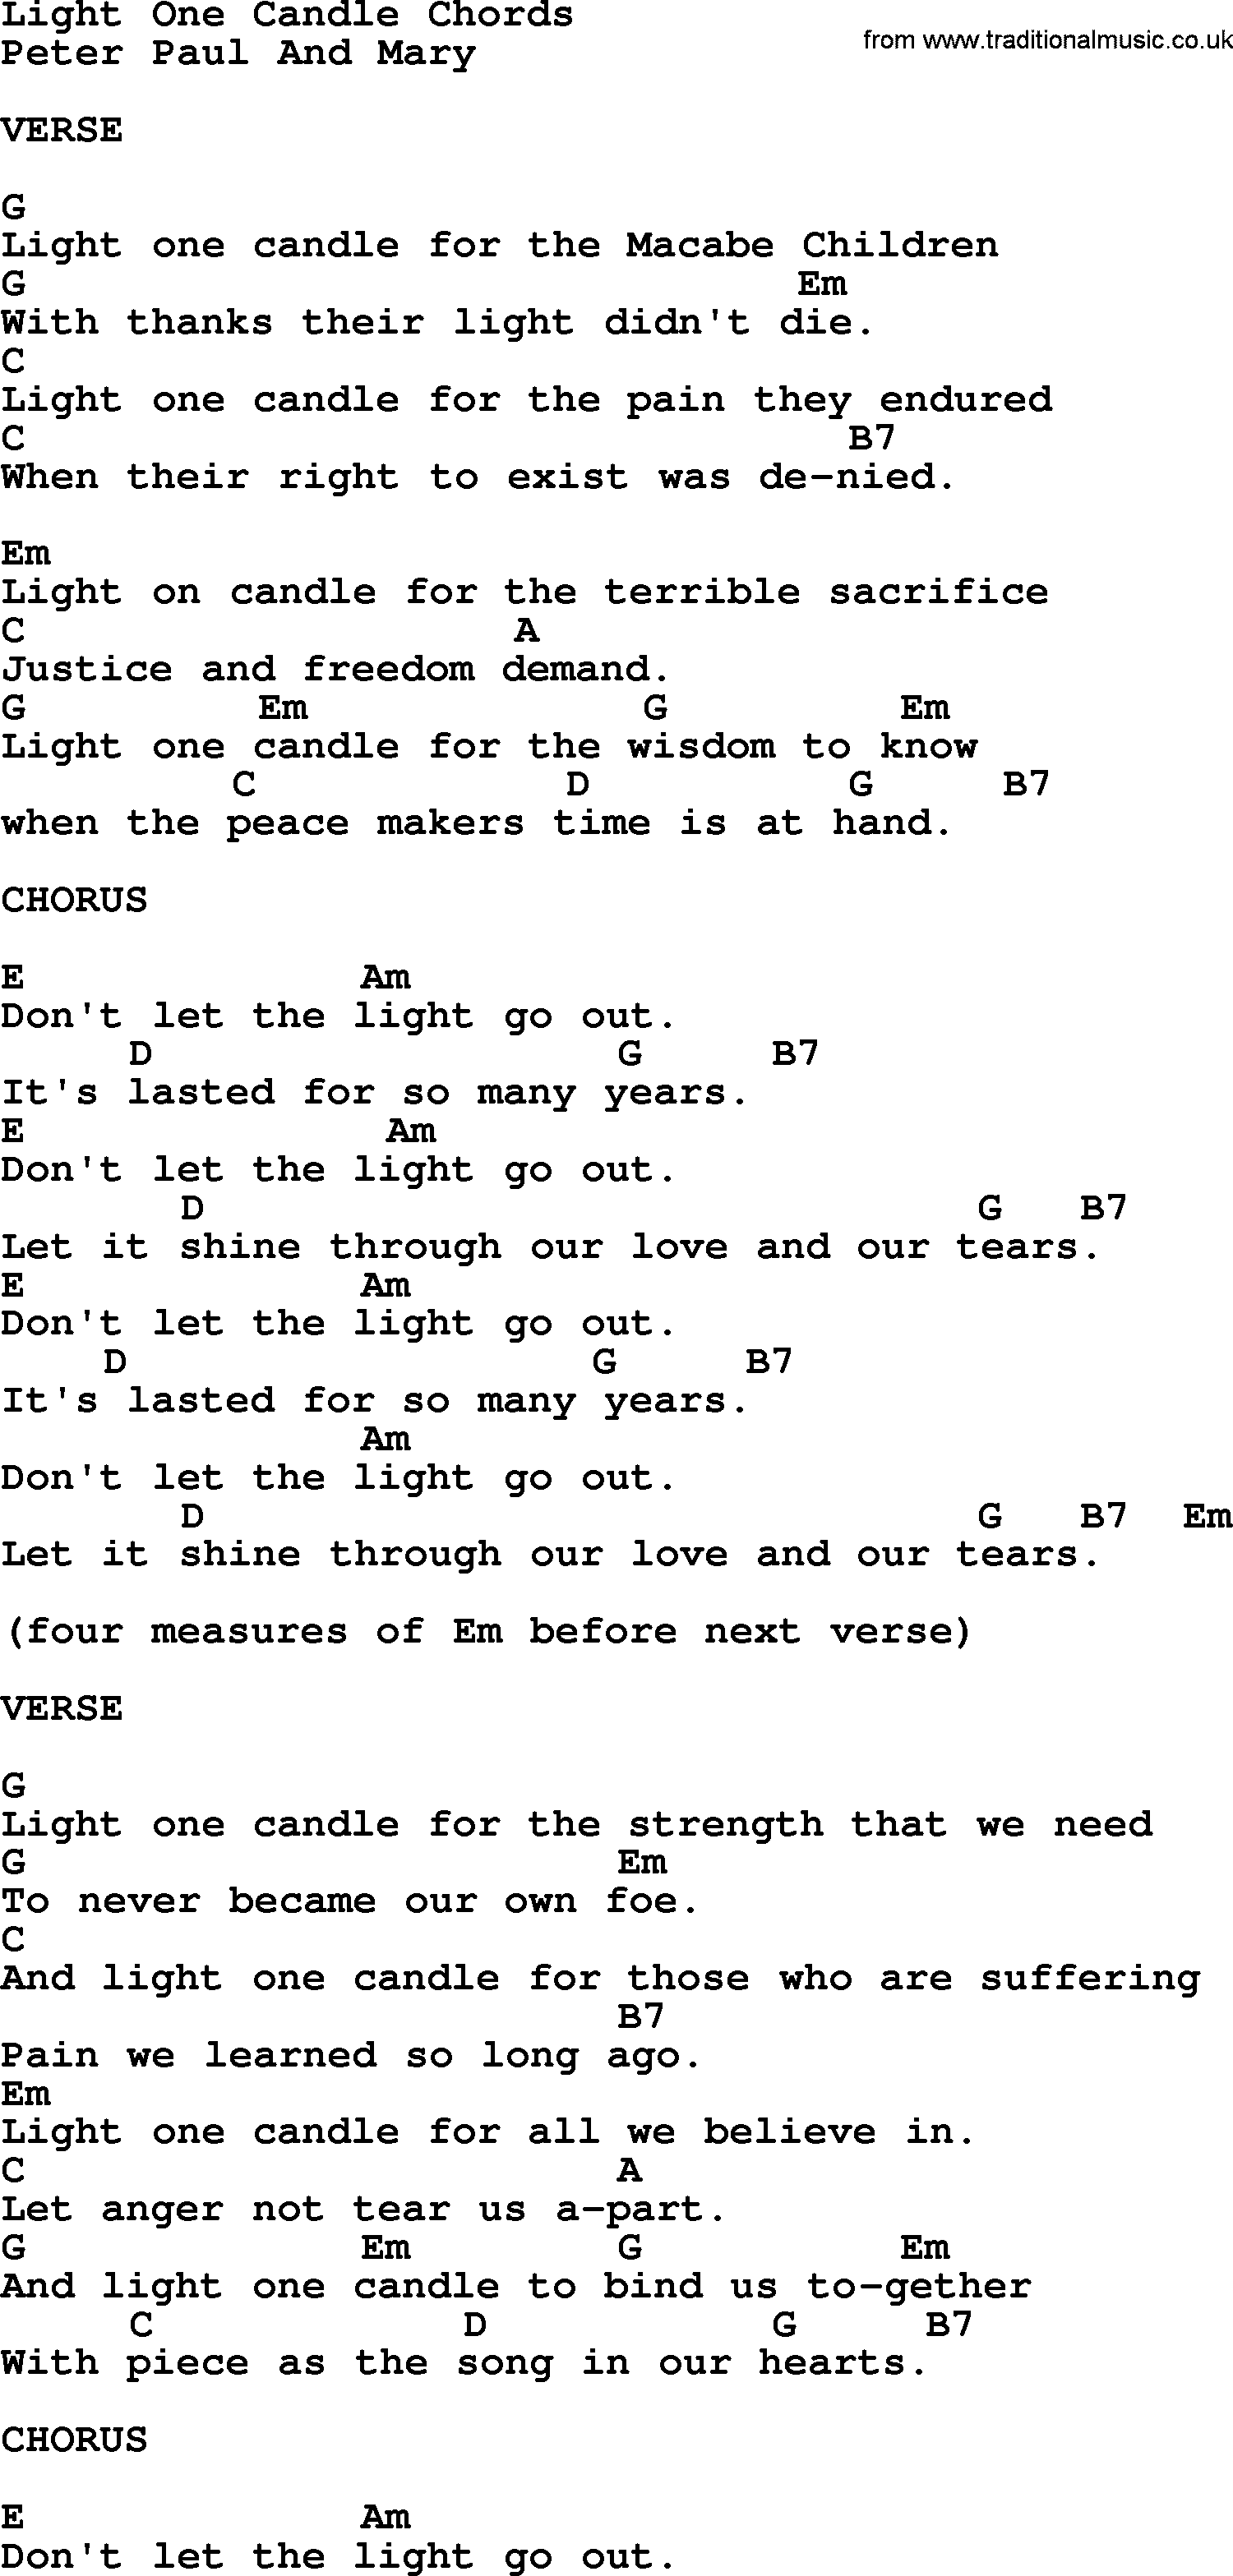 Peter, Paul and Mary song Light One Candle, lyrics and chords